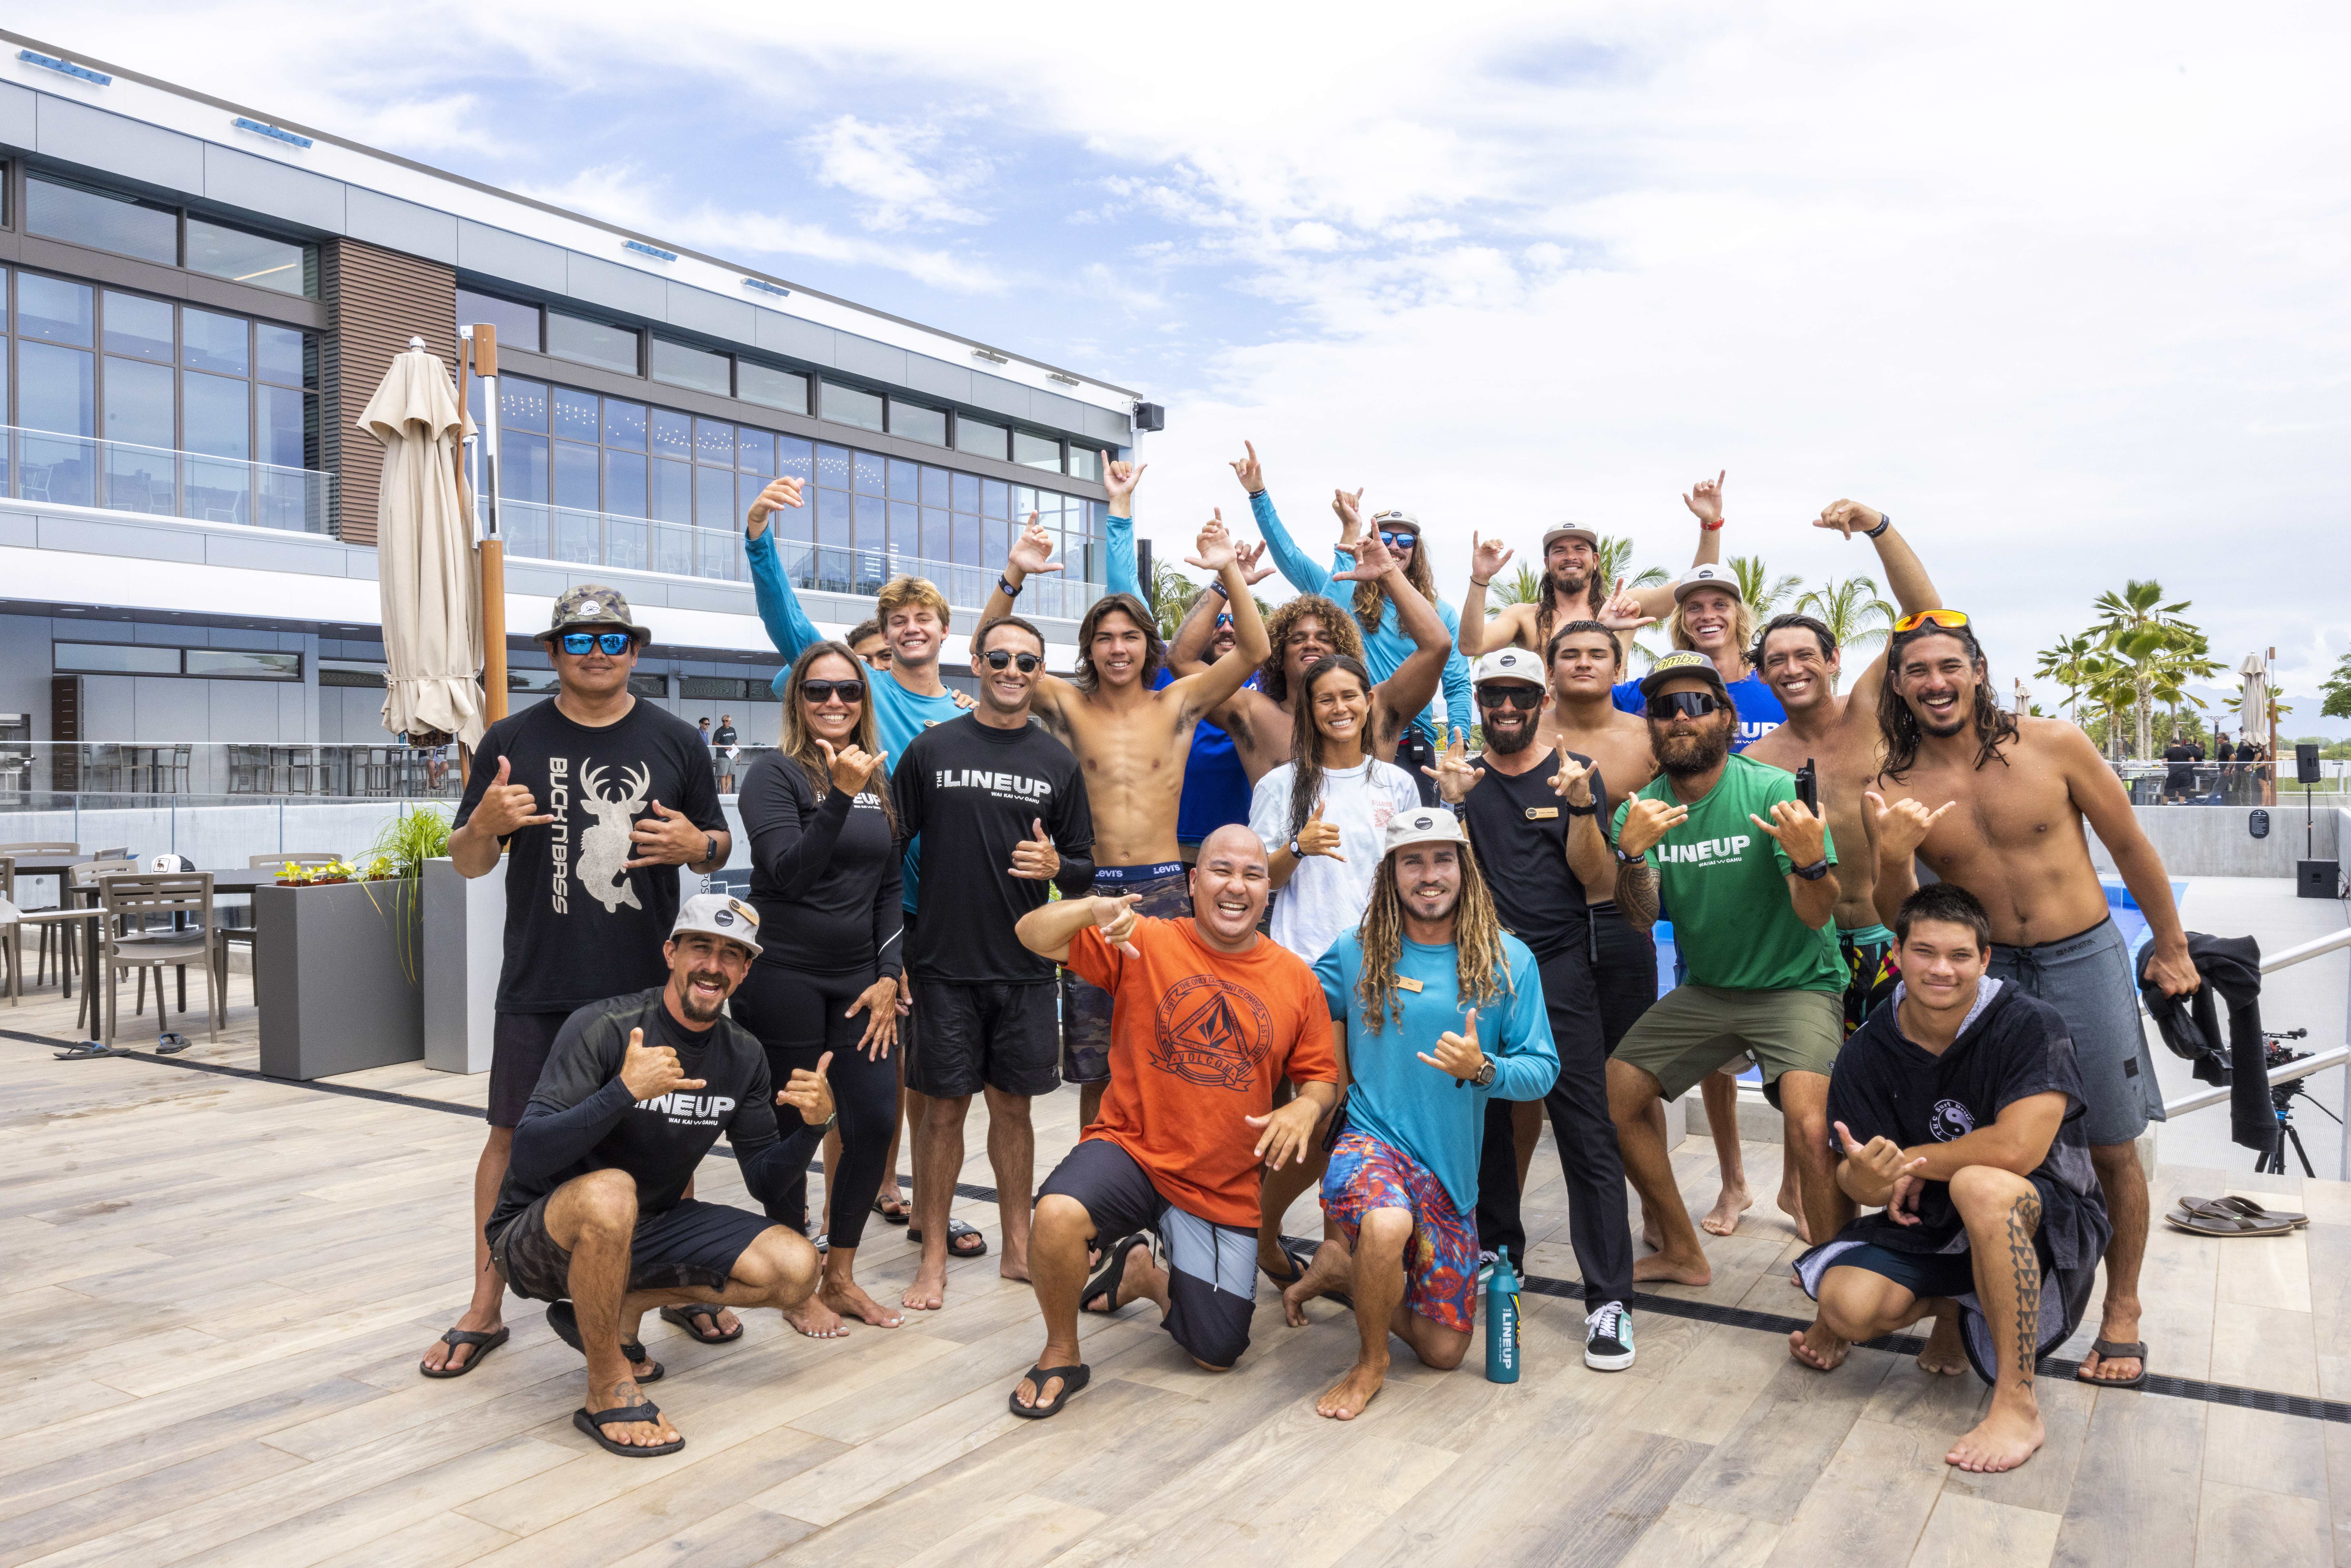 65-Foot Wave Surf Session - The LineUp at Wai Kai